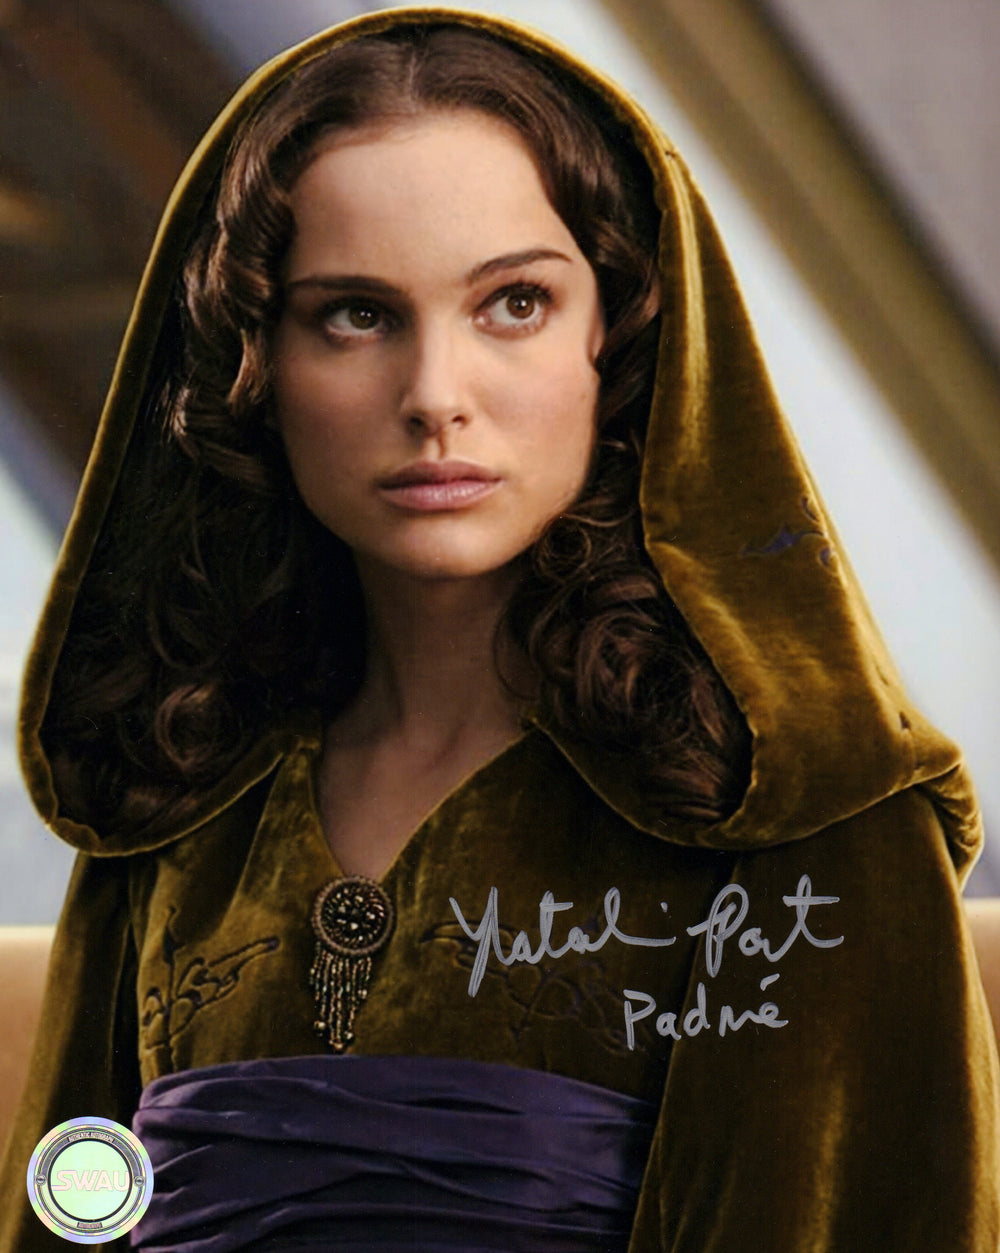 Natalie Portman as Padme Amidala in Star Wars: Episode III – Revenge of the Sith (SWAU) Signed 8x10 Photo with Character Name